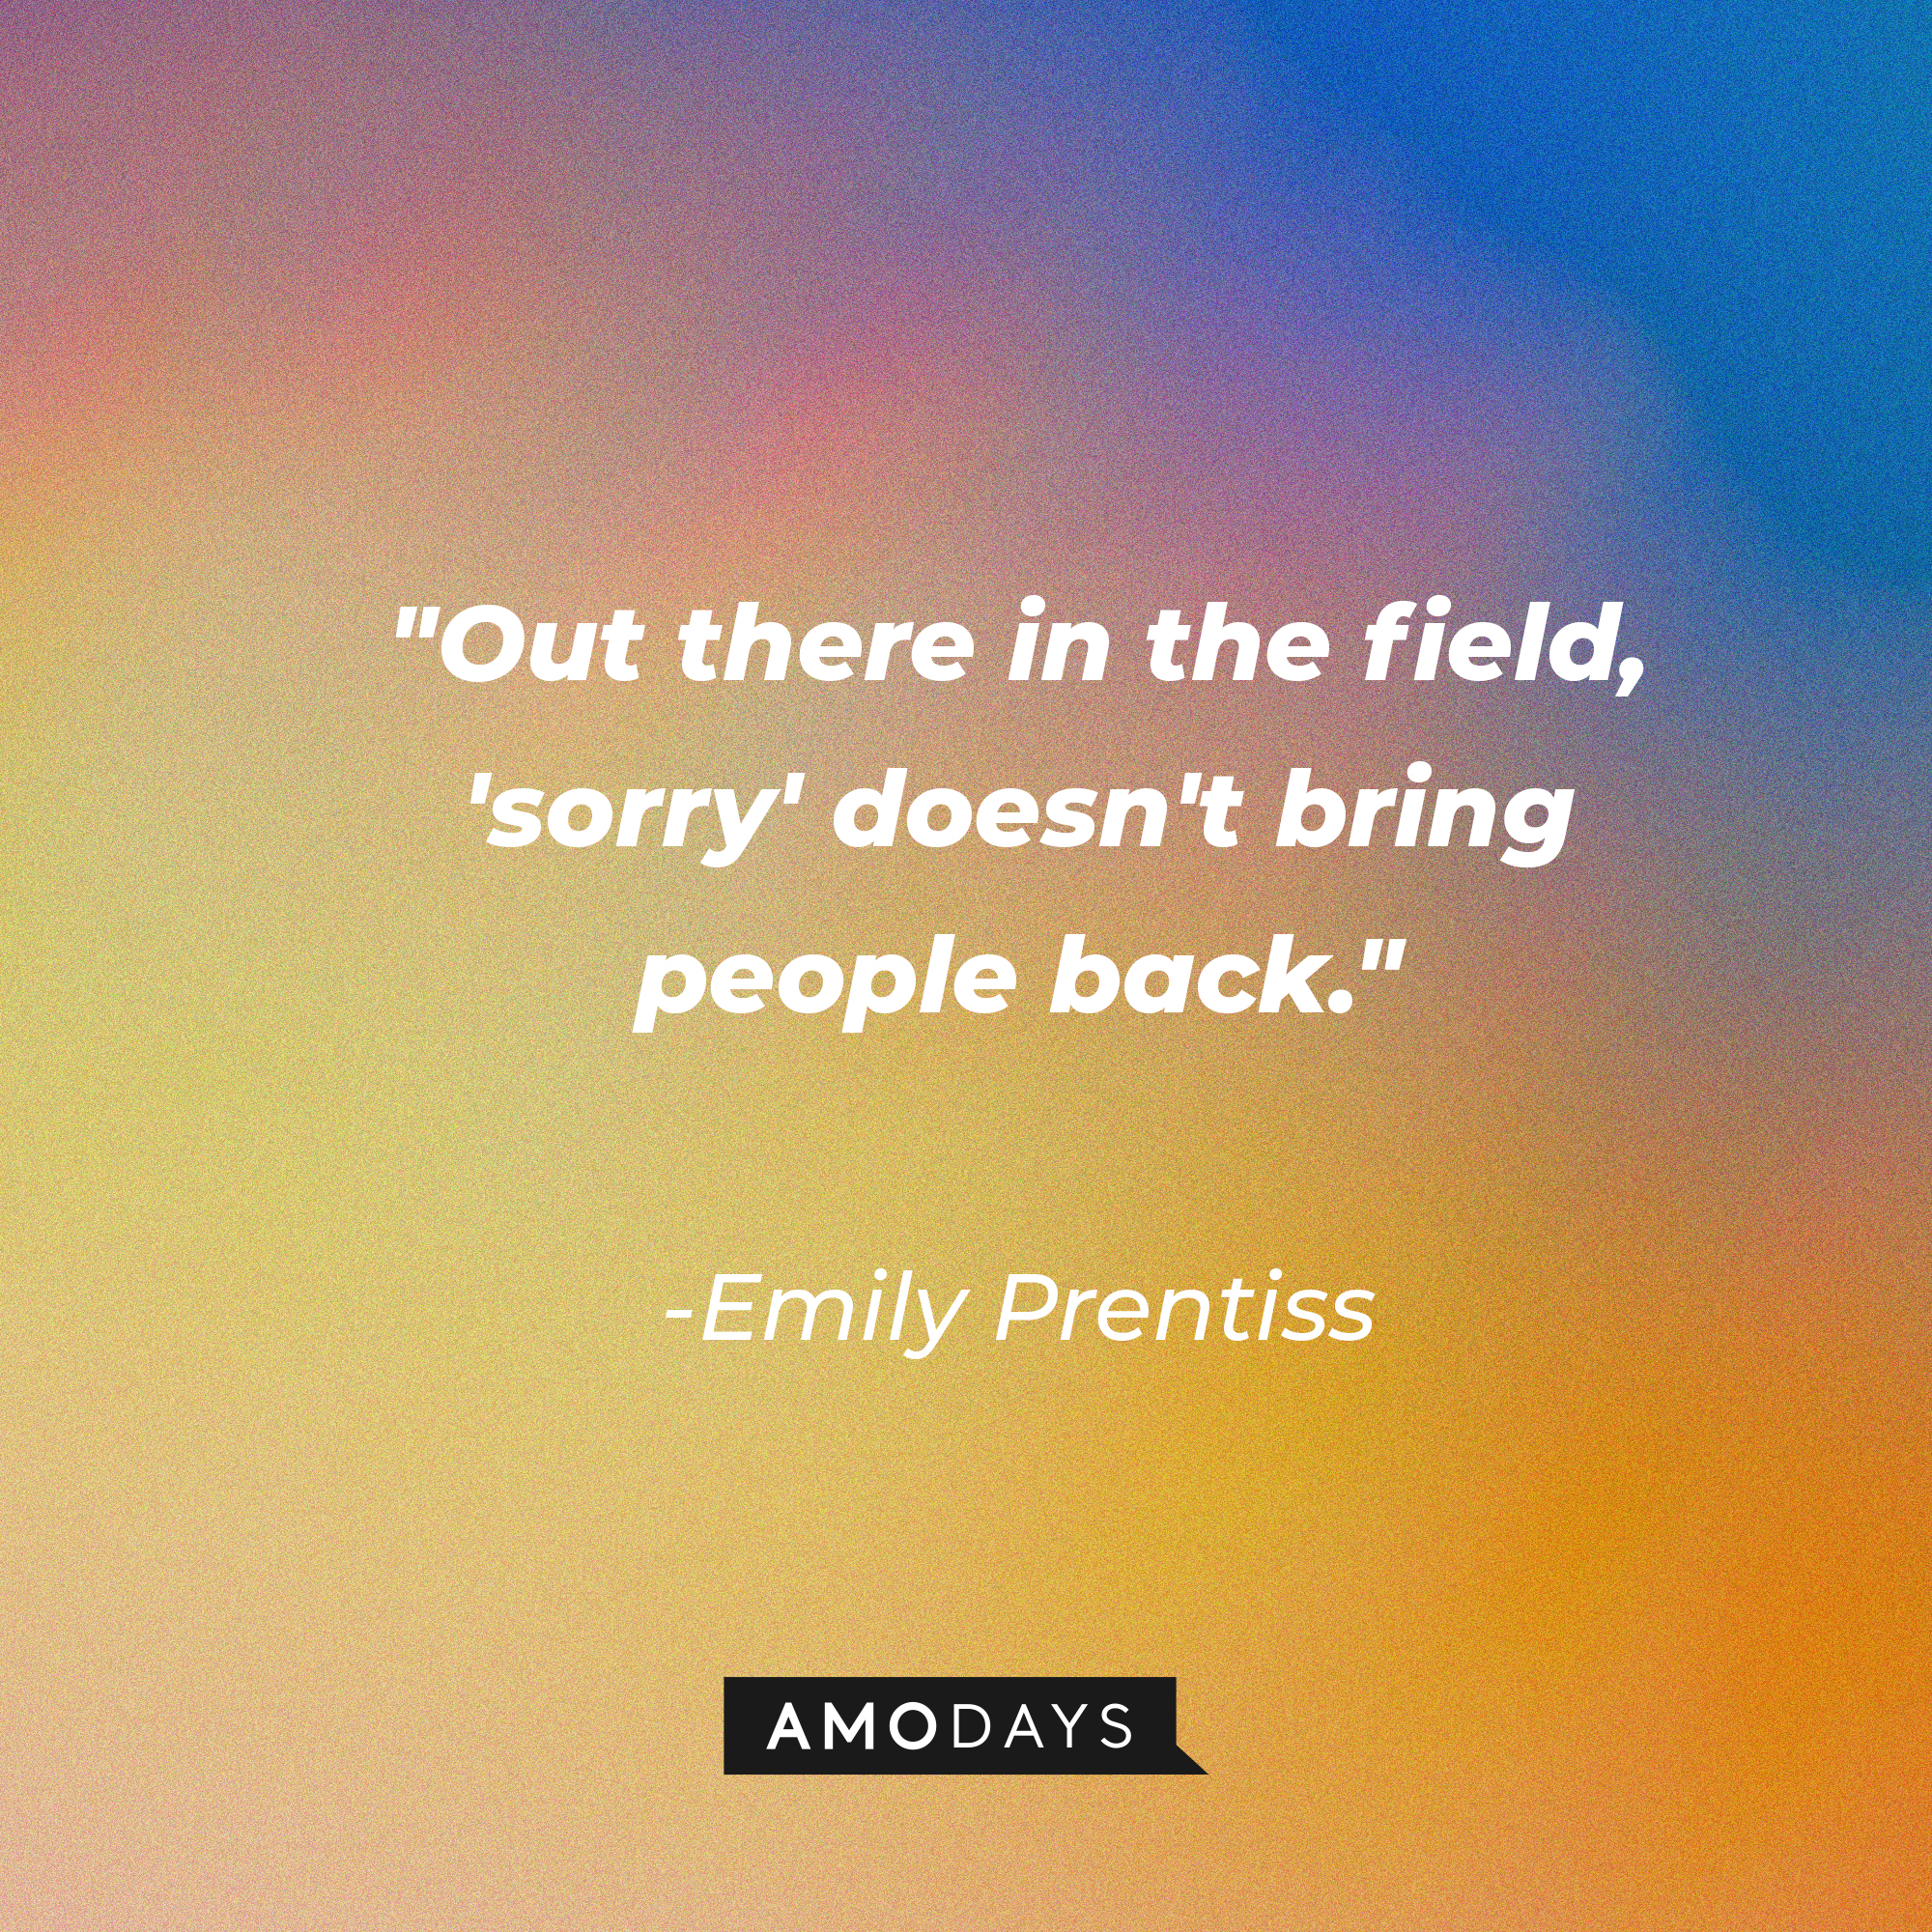 Emily Prentiss' quote: "Out there in the field, 'sorry' doesn't bring people back." | Source: AmoDays